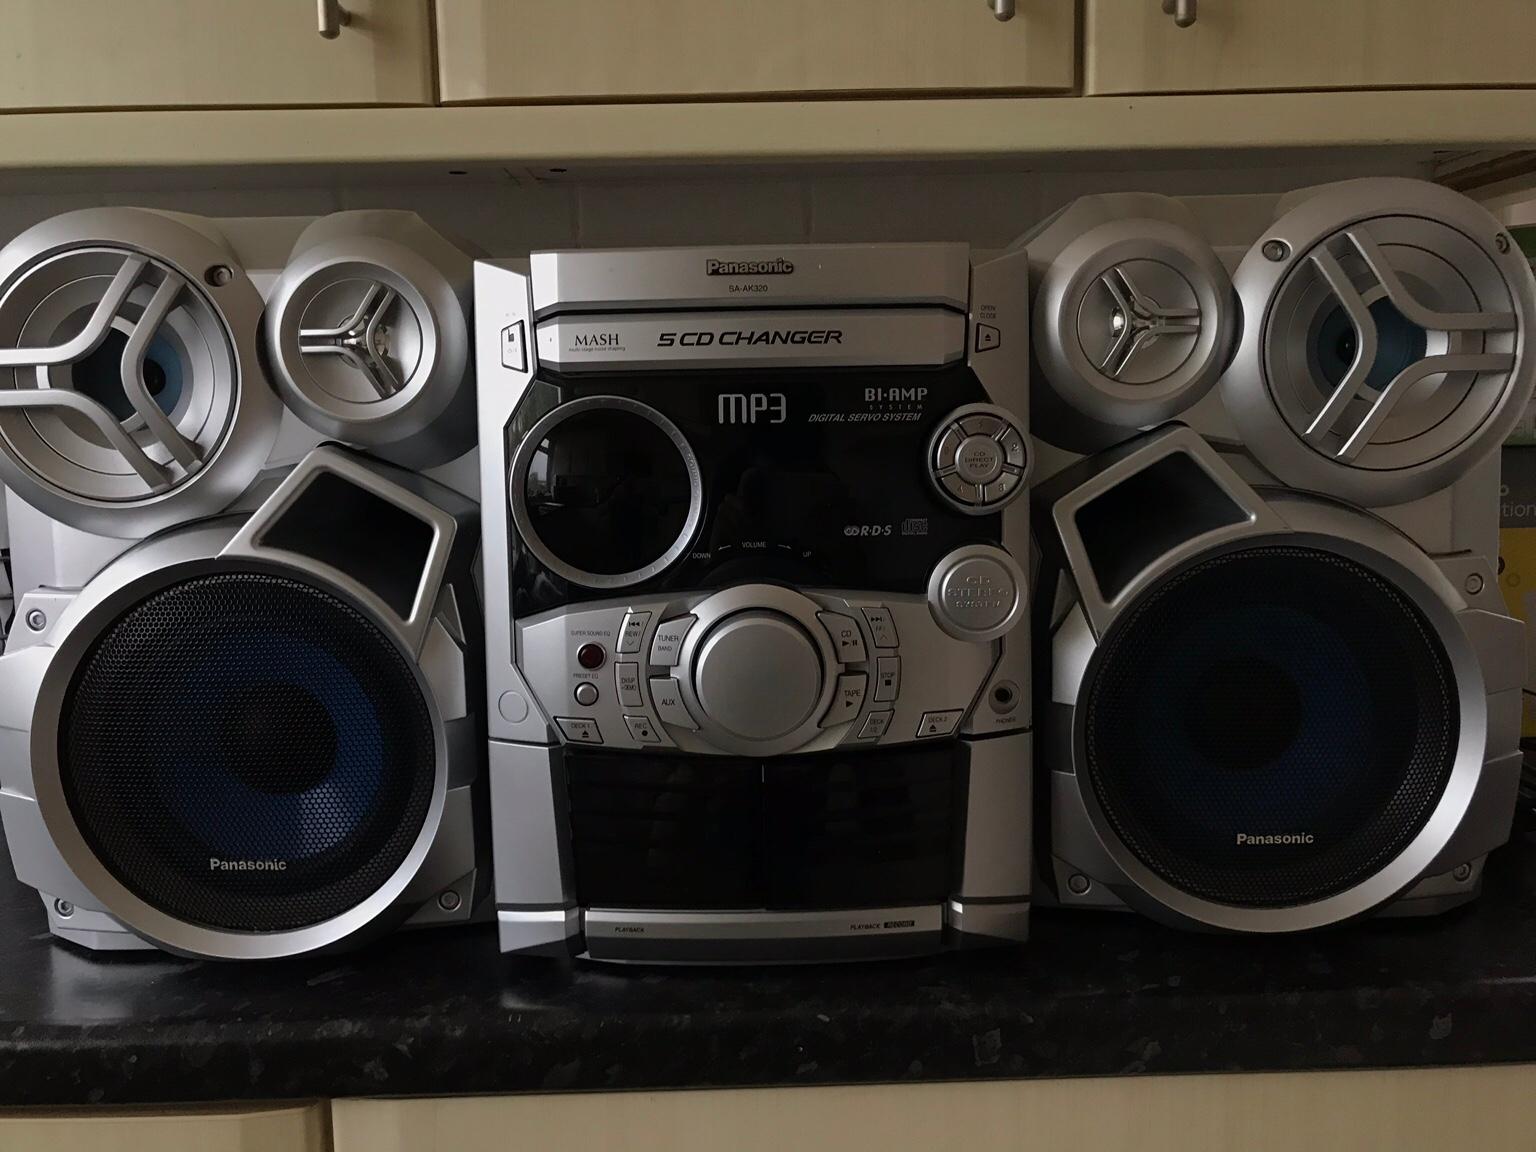 Panasonic 240W Hifi Speaker System in BS34 Gifford for £30.00 for sale